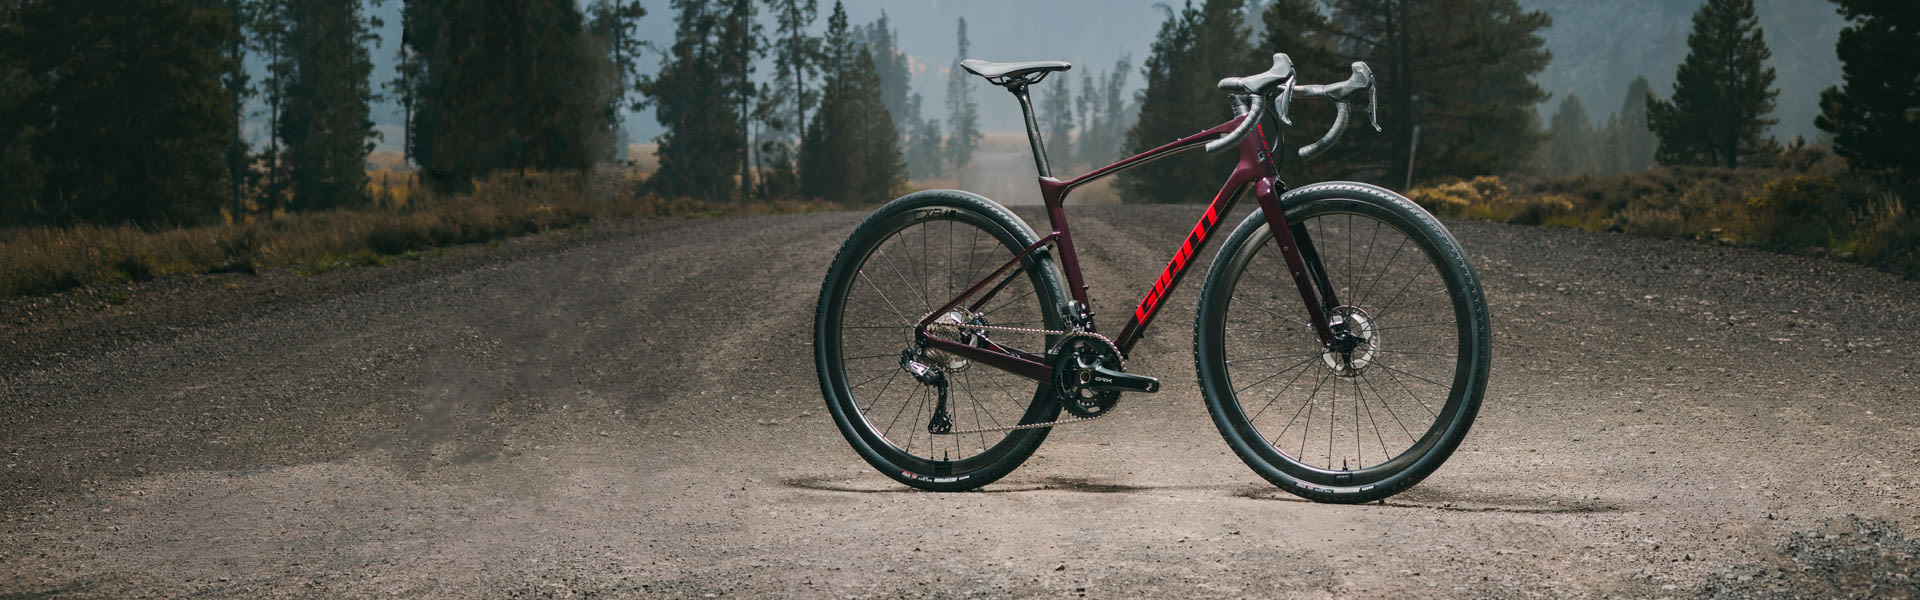 The All-New Revolt Gravel Bike Giant Bicycles US